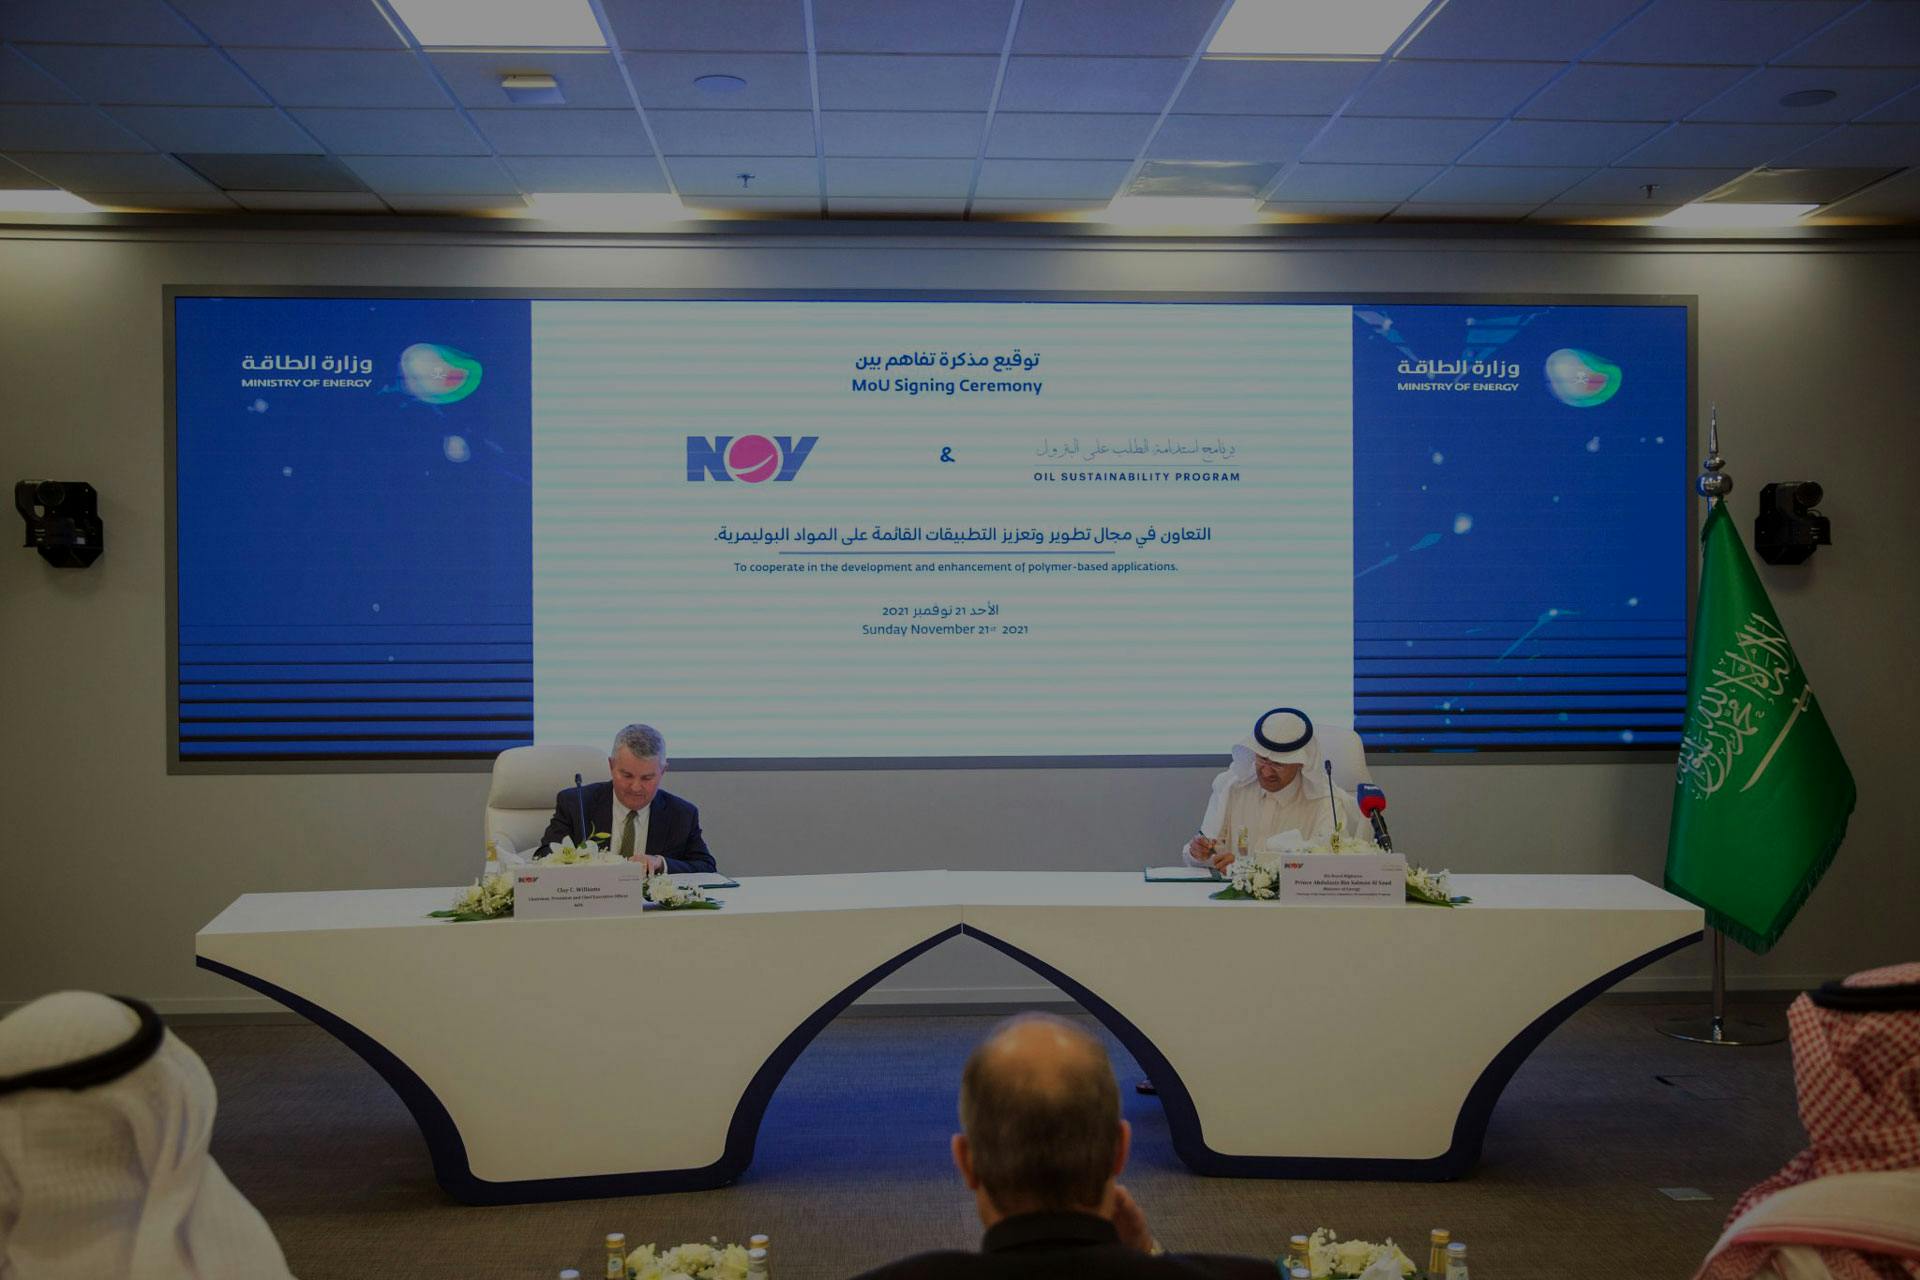 Clay C. Williams and HRH Prince Abdulaziz bin Salman signing MoU in front of a large screen